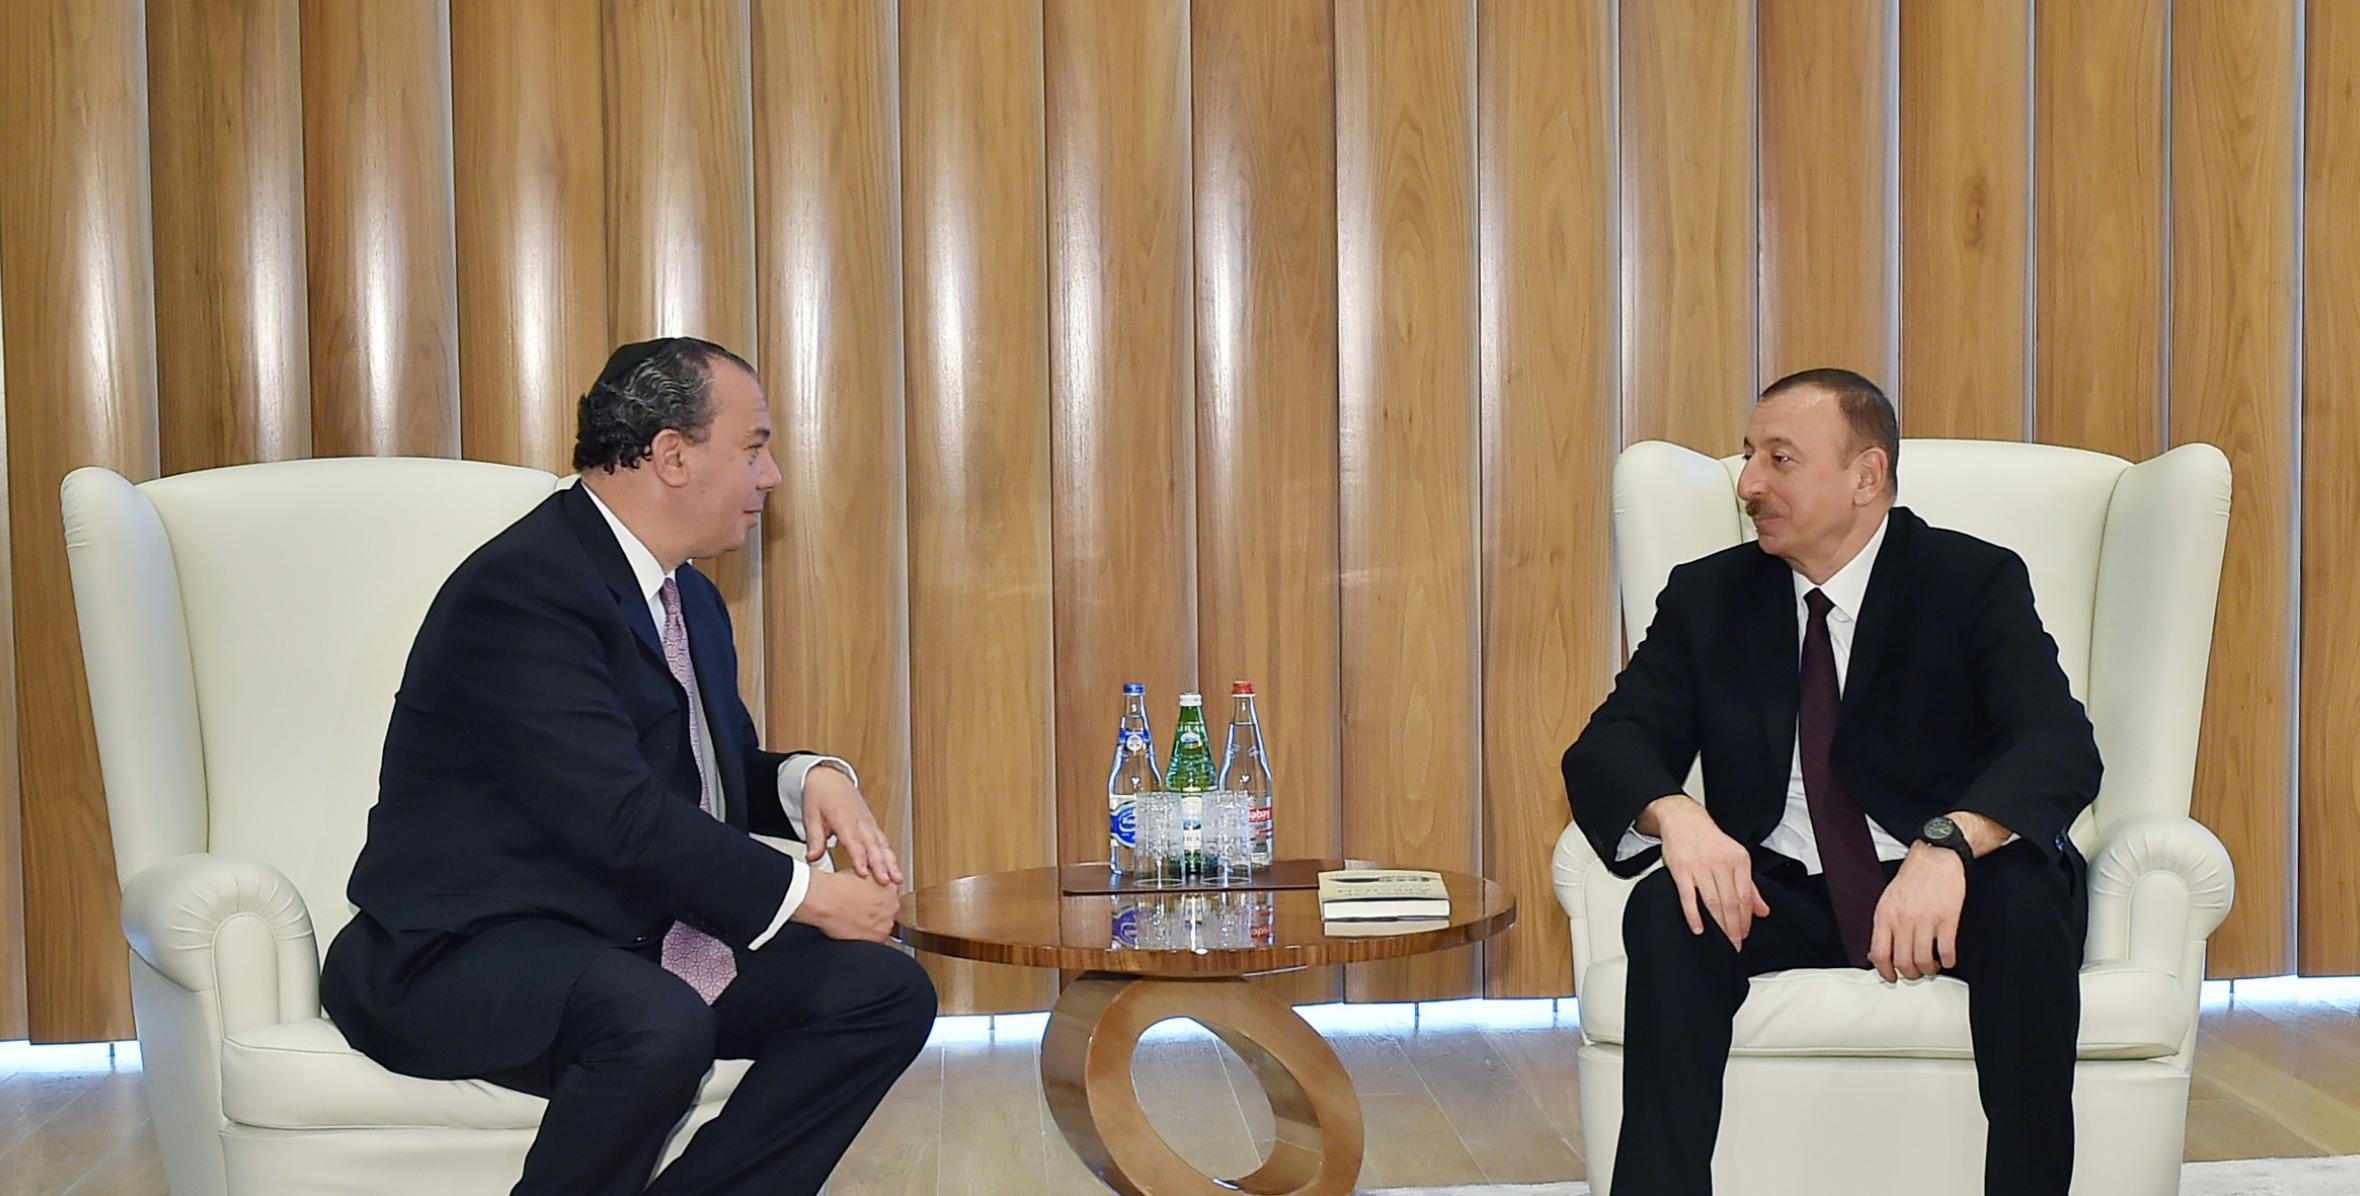 Ilham Aliyev received the Chairman of the US-based Foundation for Ethnic Understanding